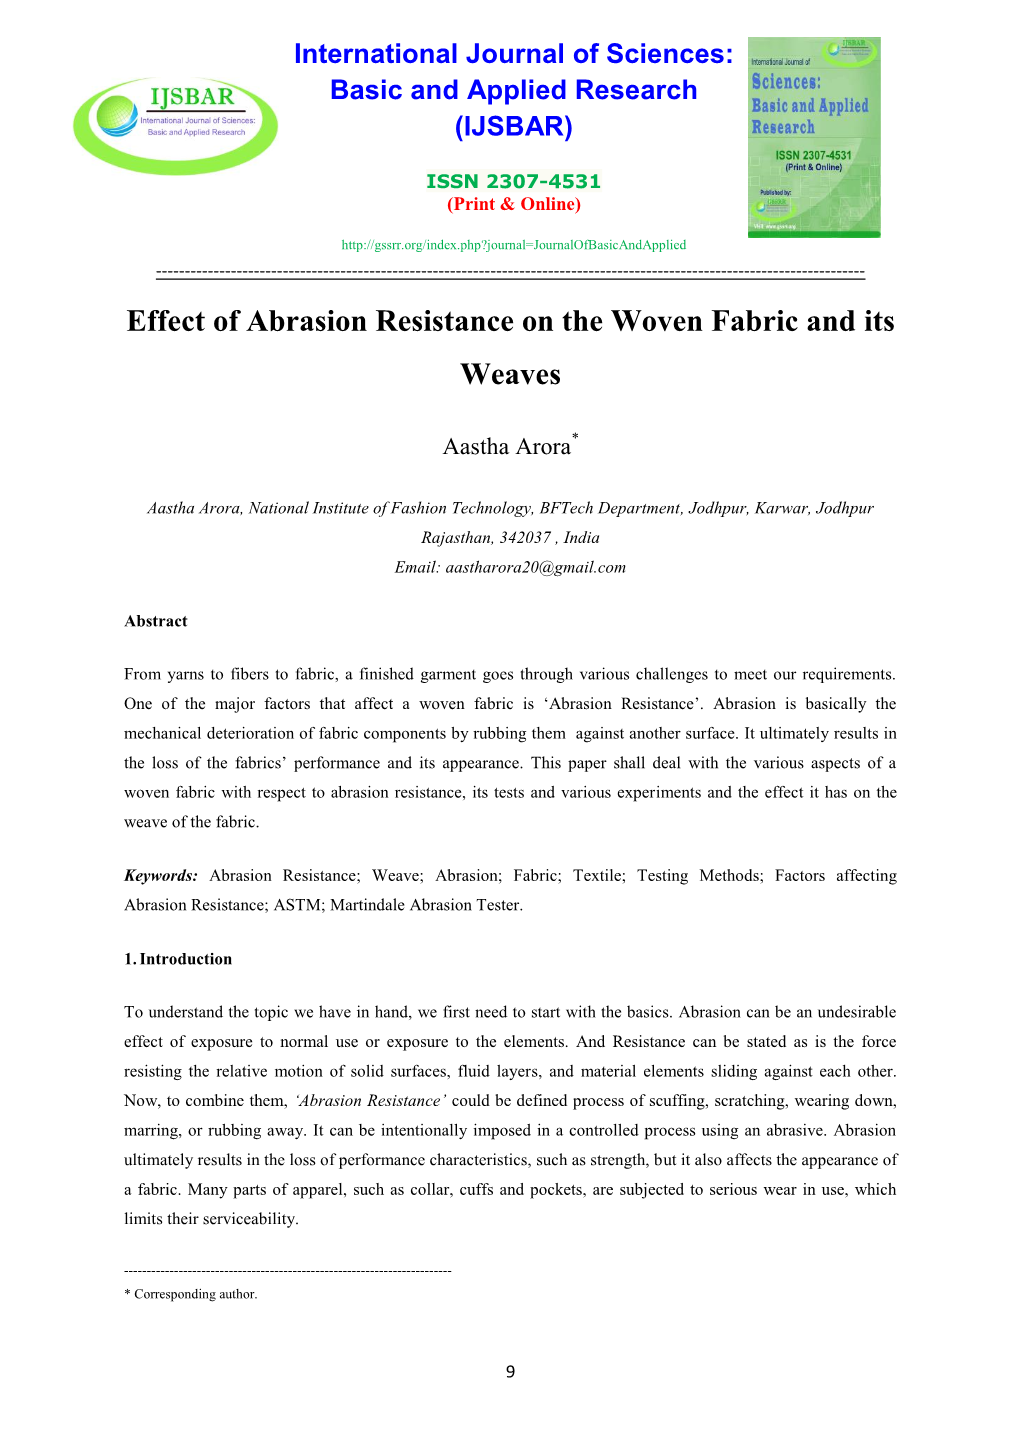 Effect of Abrasion Resistance on the Woven Fabric and Its Weaves